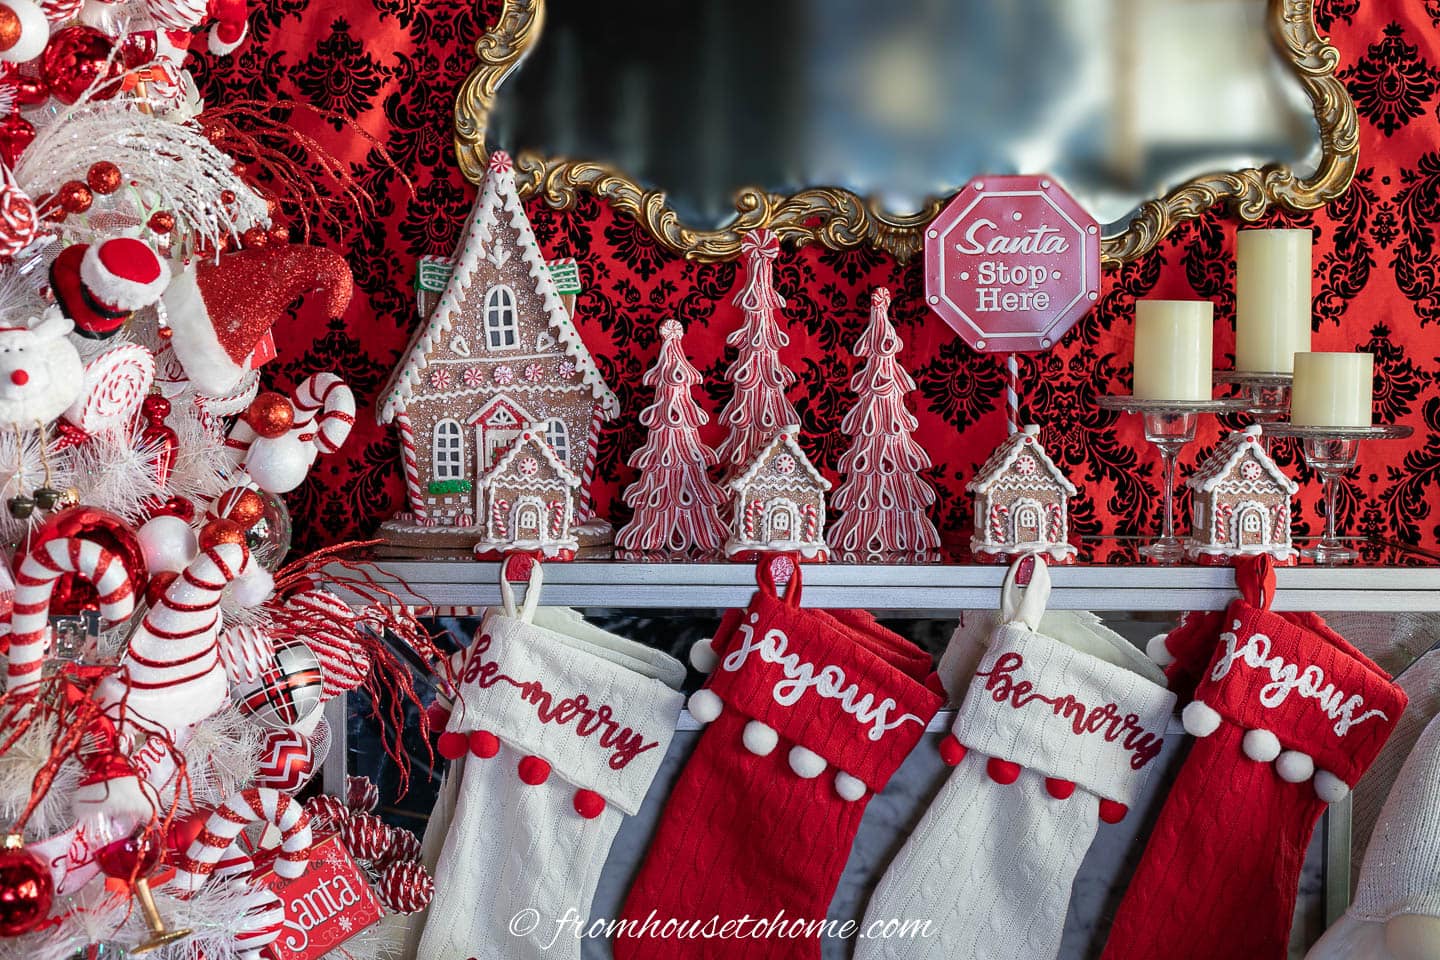 Christmas fireplace mantel decorated with red and white stockings, gingerbread house stocking hangers and red and white trees